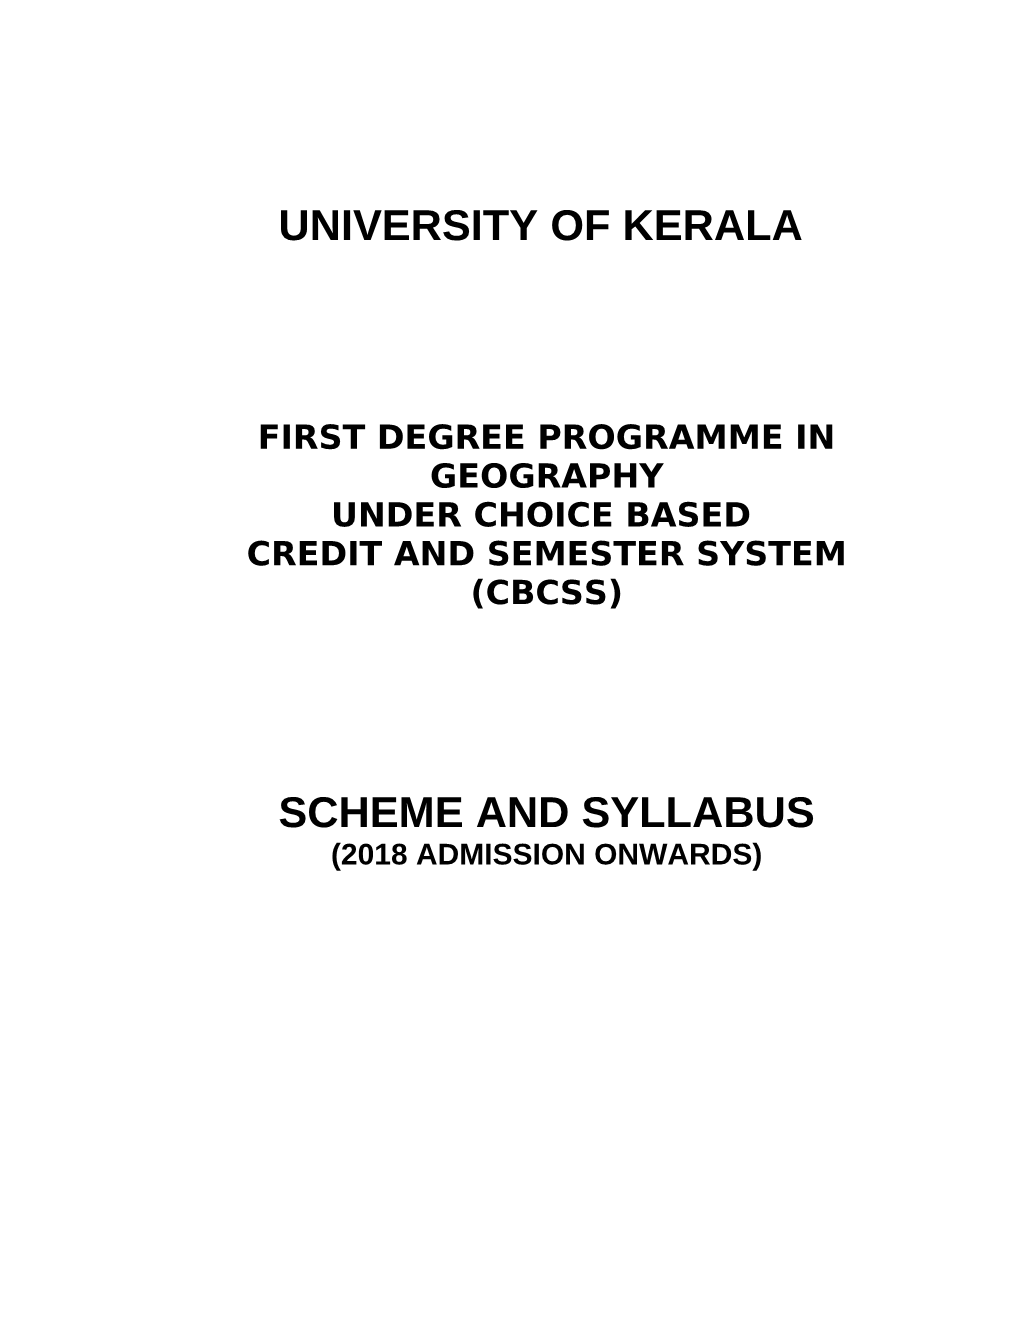 First Degree Programme in Geography Under Choice Based Credit and Semester System (Cbcss)